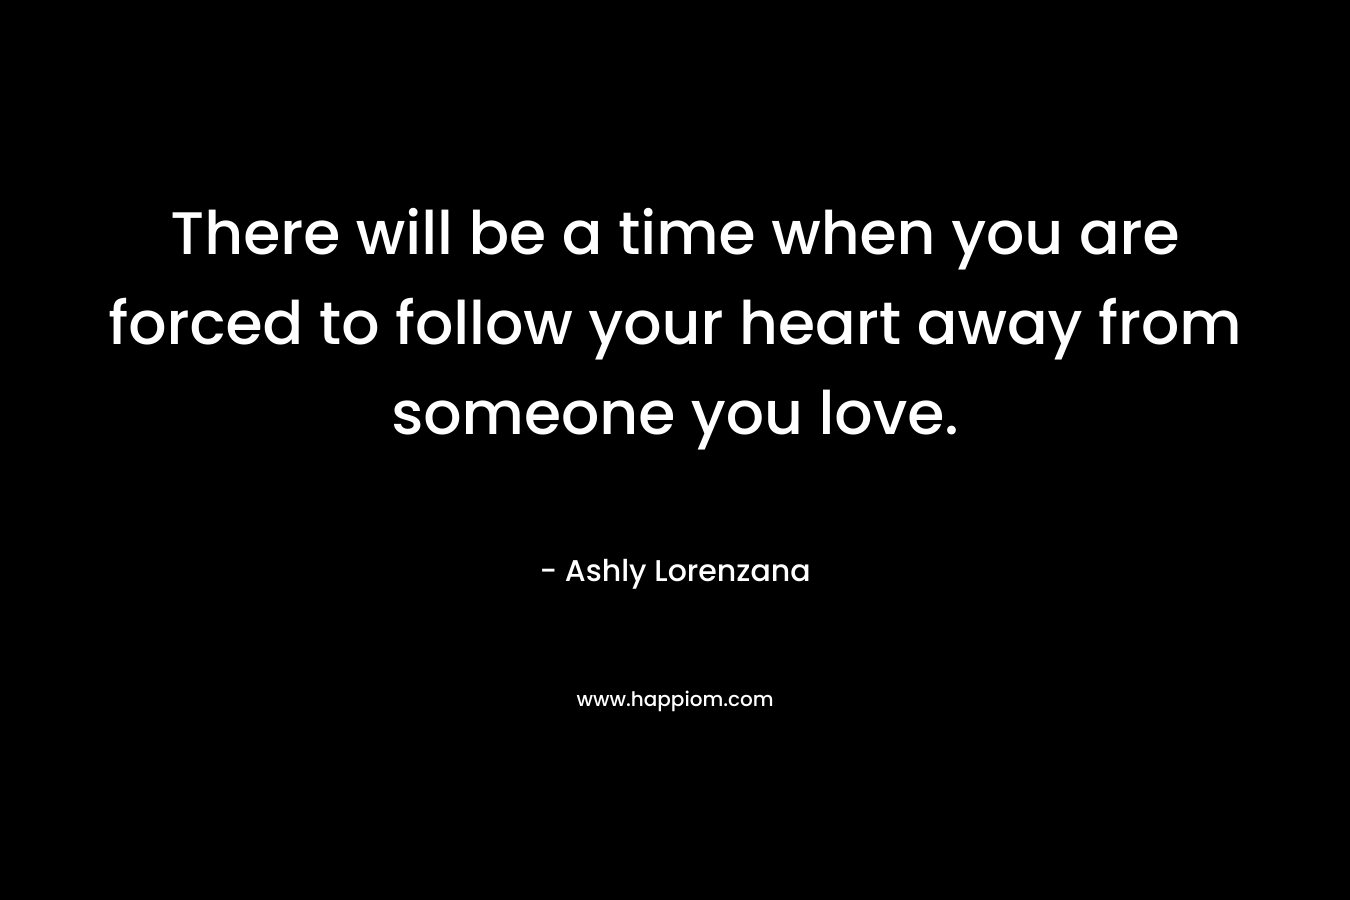 There will be a time when you are forced to follow your heart away from someone you love. – Ashly Lorenzana